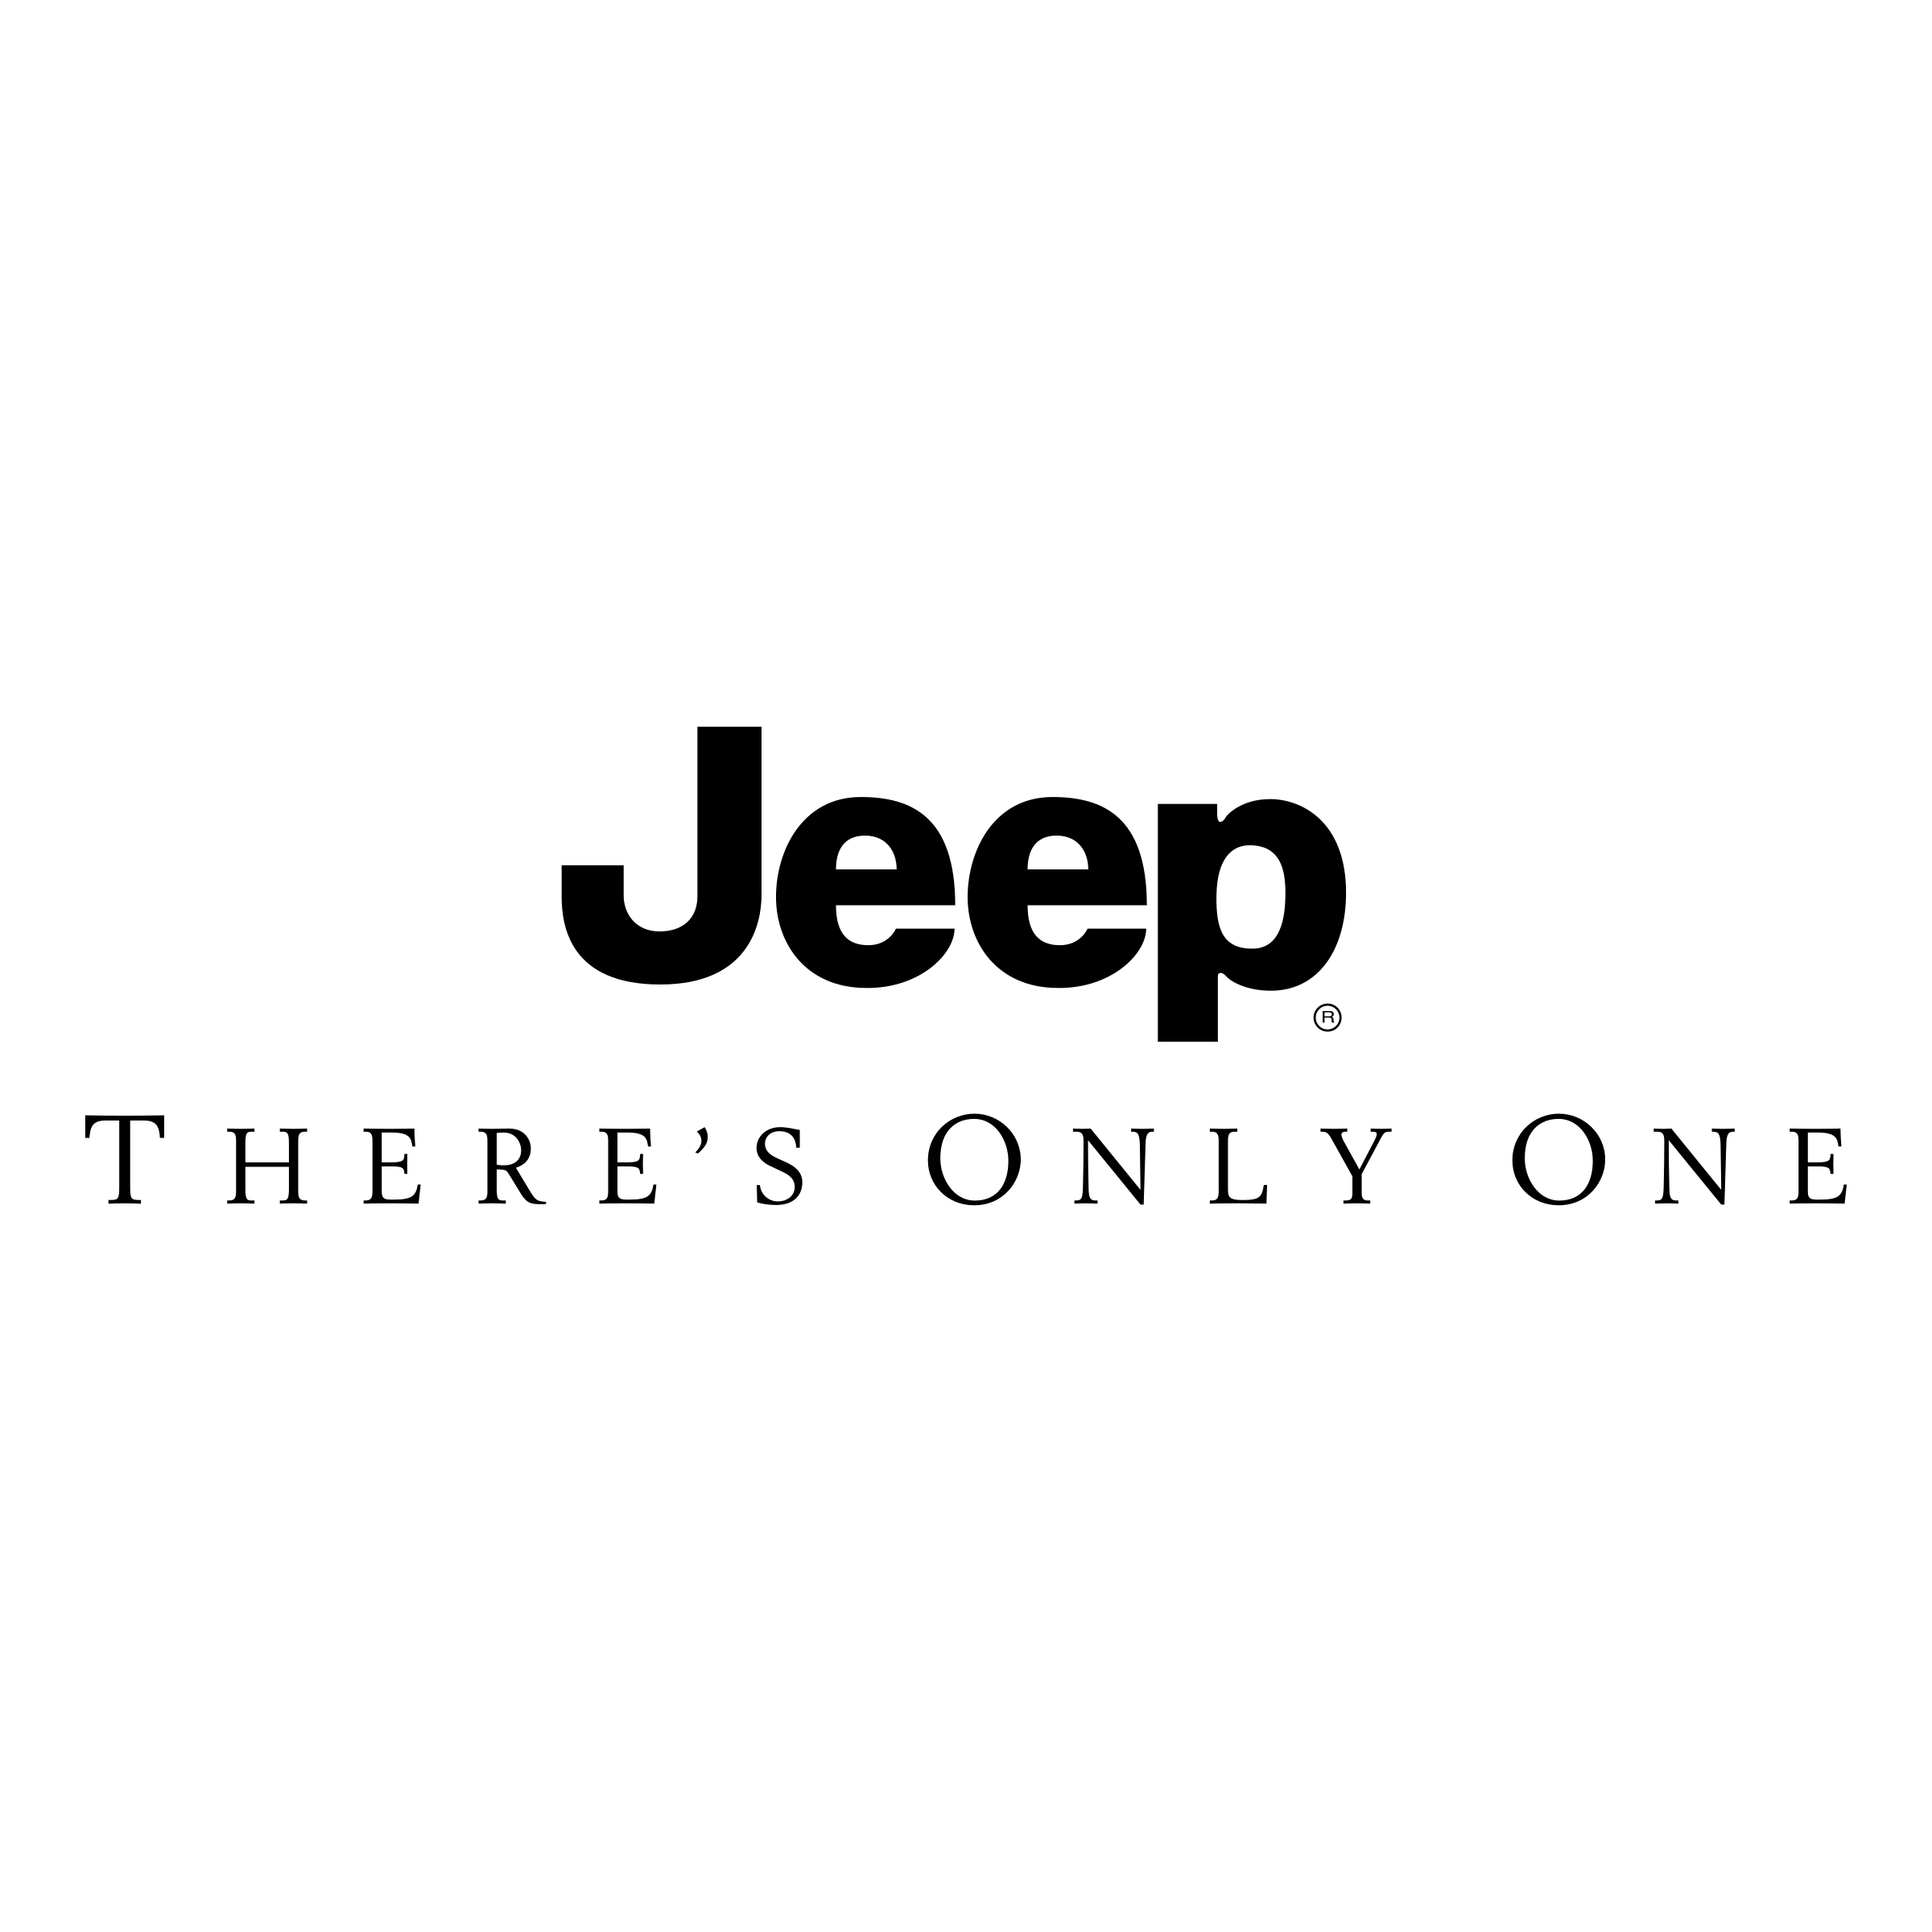 Only in a Jeep Logo - Jeep Logo PNG Transparent & SVG Vector - Freebie Supply